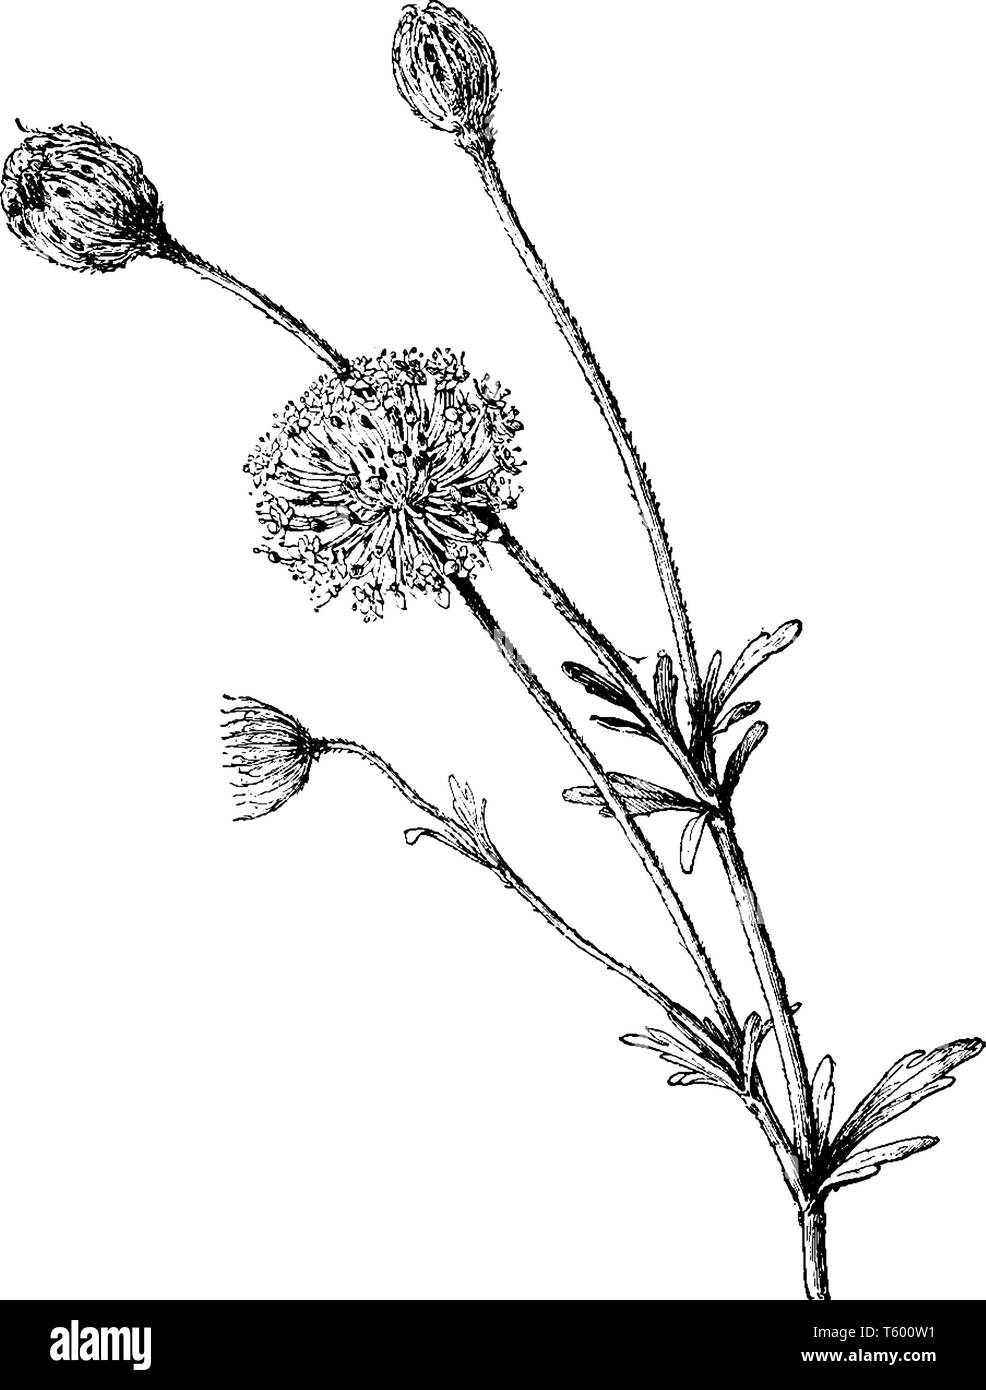 This is a flower of Trachymene Caerulea and it is genus of Trachymene. Flowers have curving stems with fine, deeply lobed leaves, vintage line drawing Stock Vector